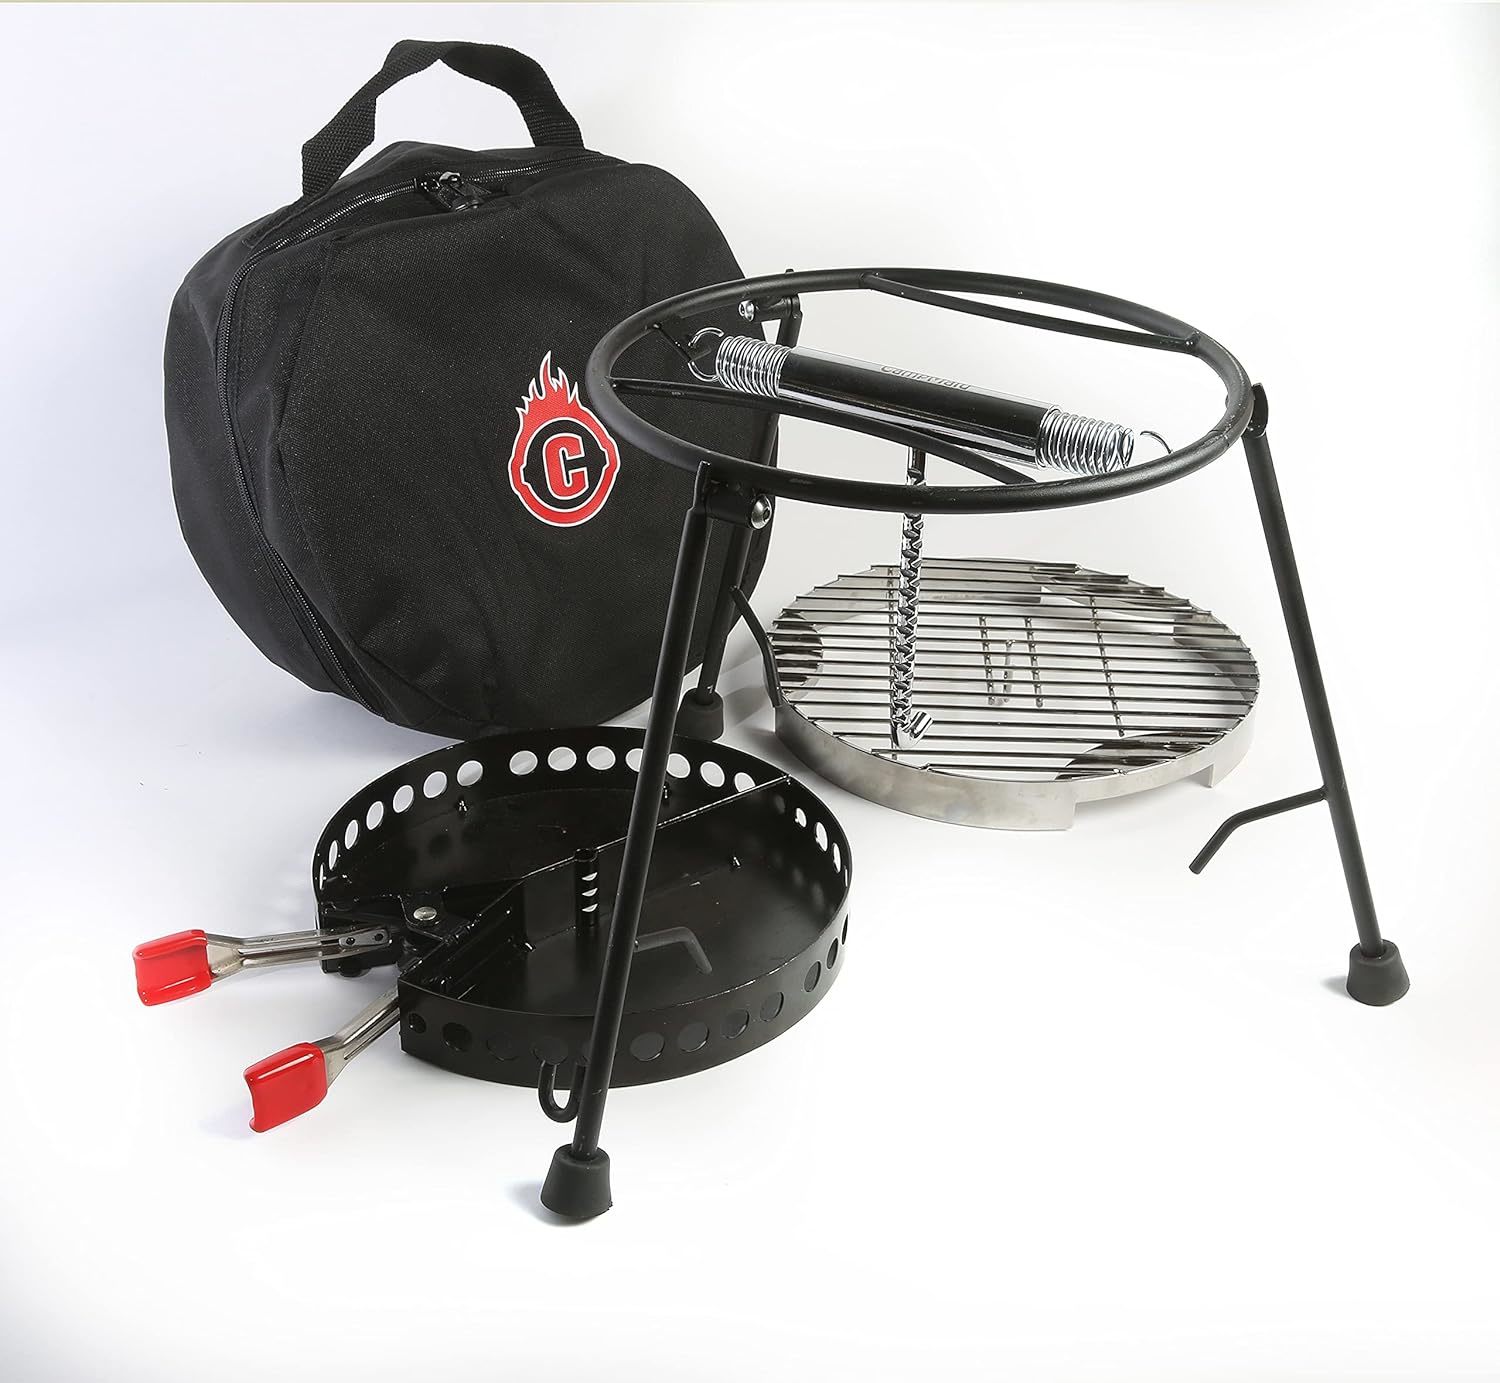 Primary image for Campmaid Grill And Smoker With Carry Bag, Dutch Oven Tools Set,, (3 Pc. Set).